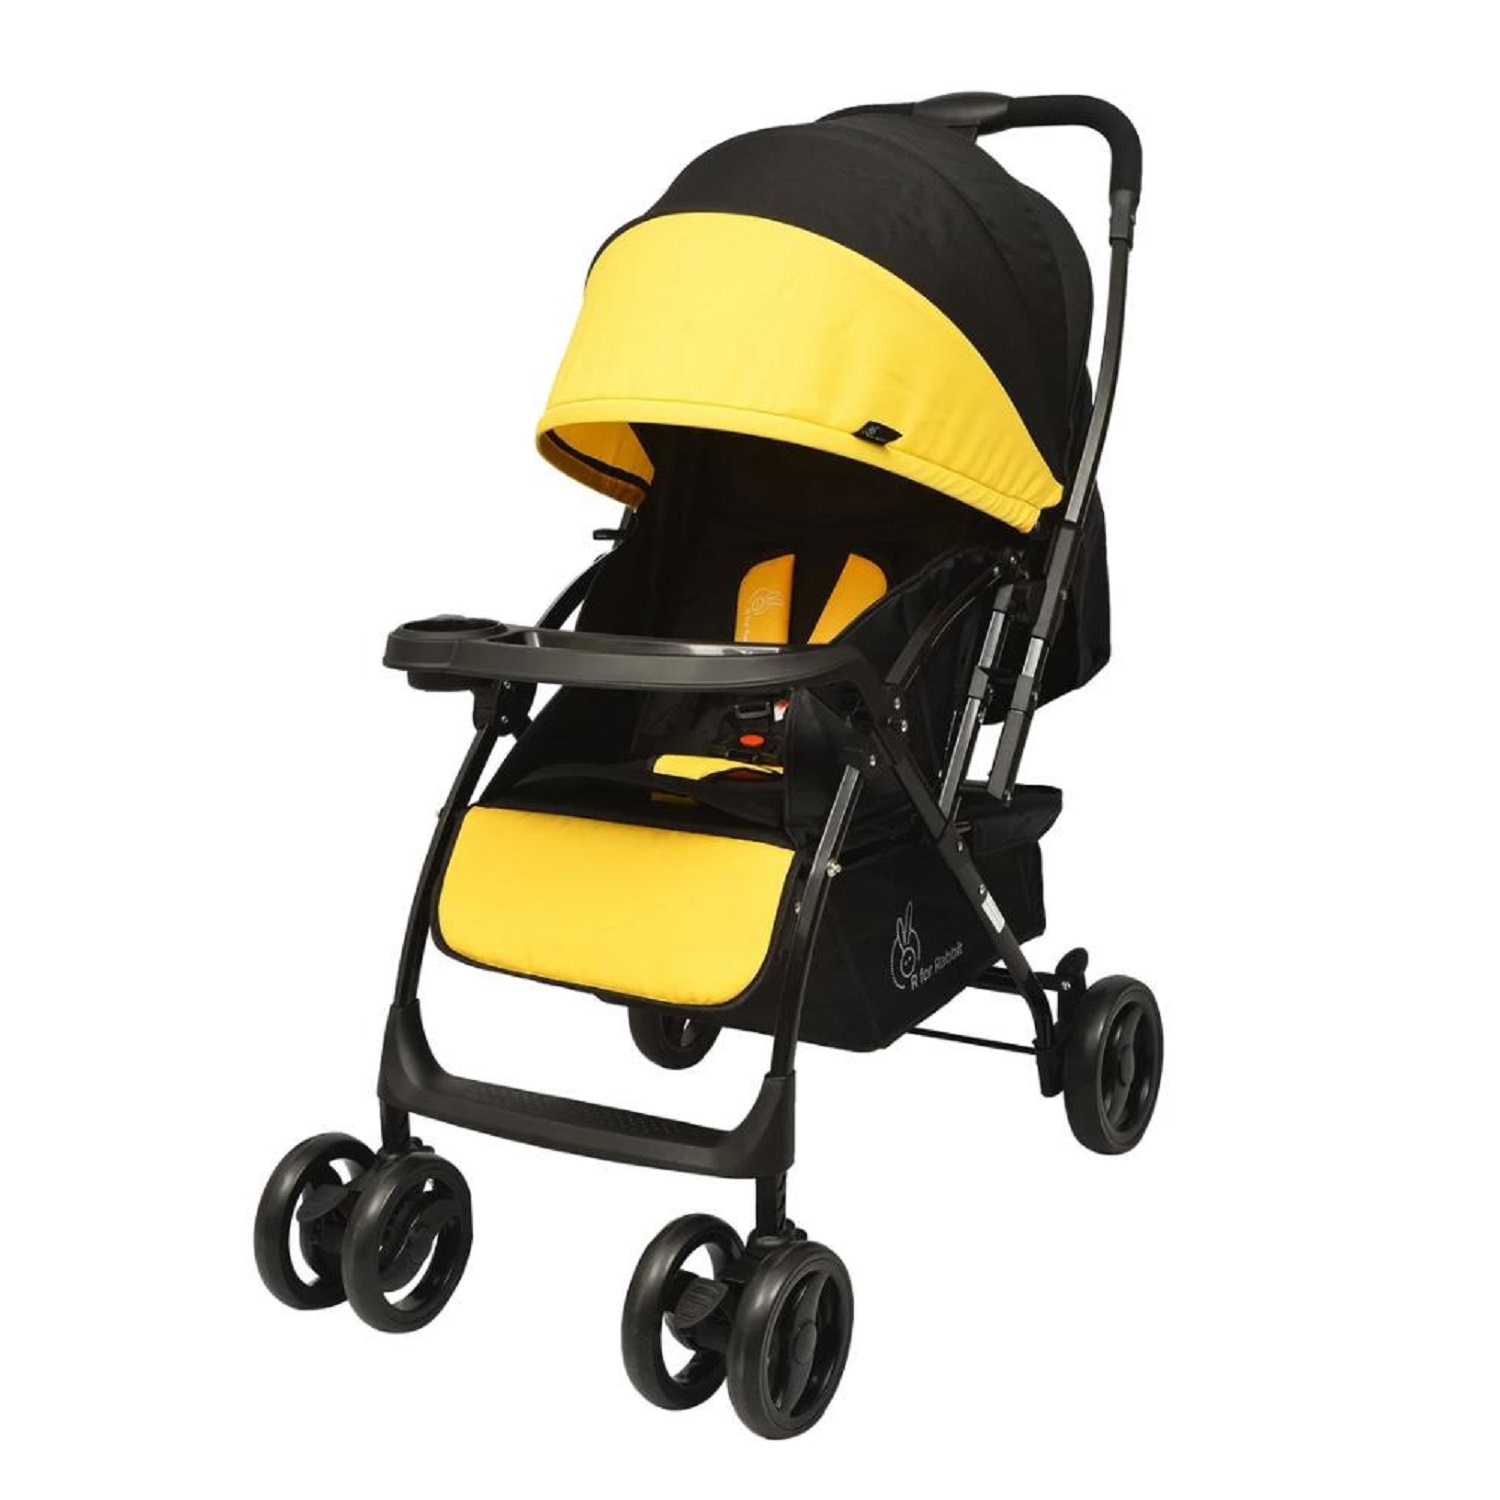 R for Rabbit Cuppy Cake Grand Stroller